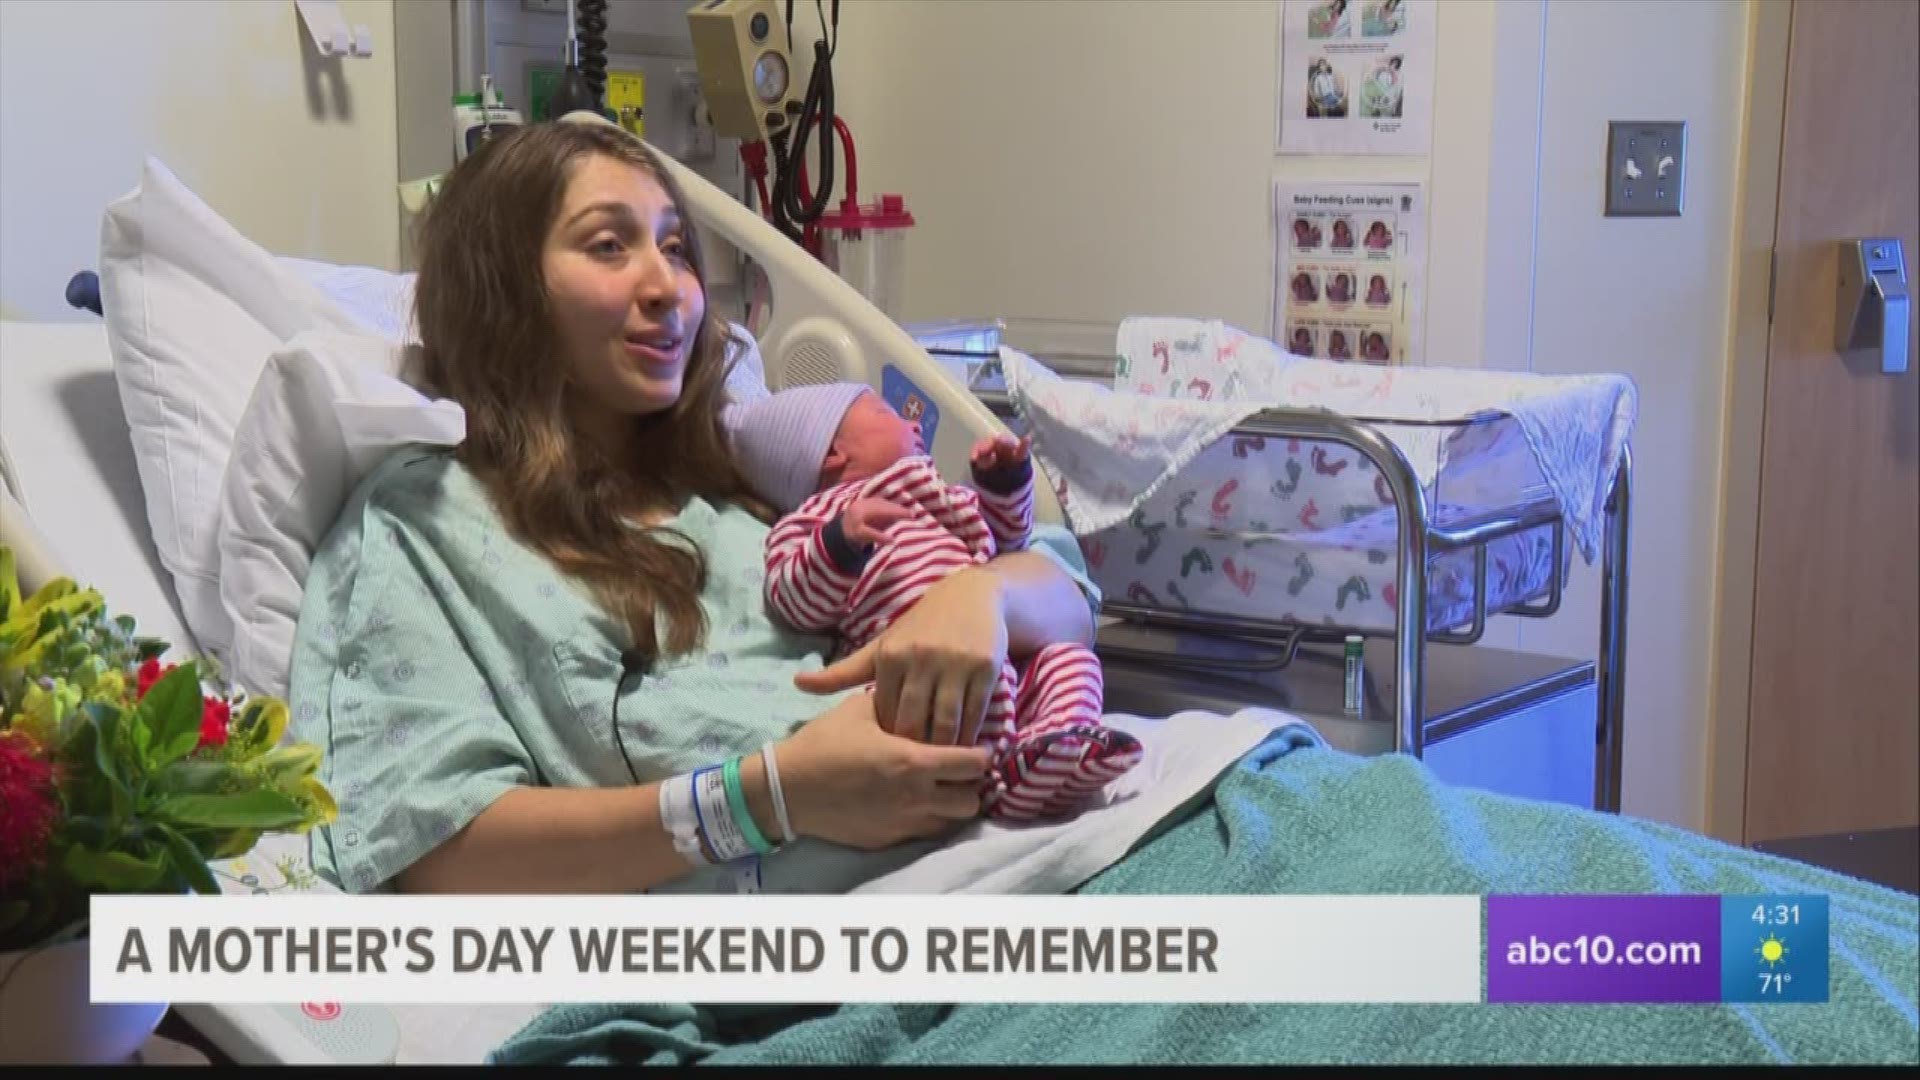 Mother's Day weekend was extra special for several women who gave birth at Sutter Medical Center.